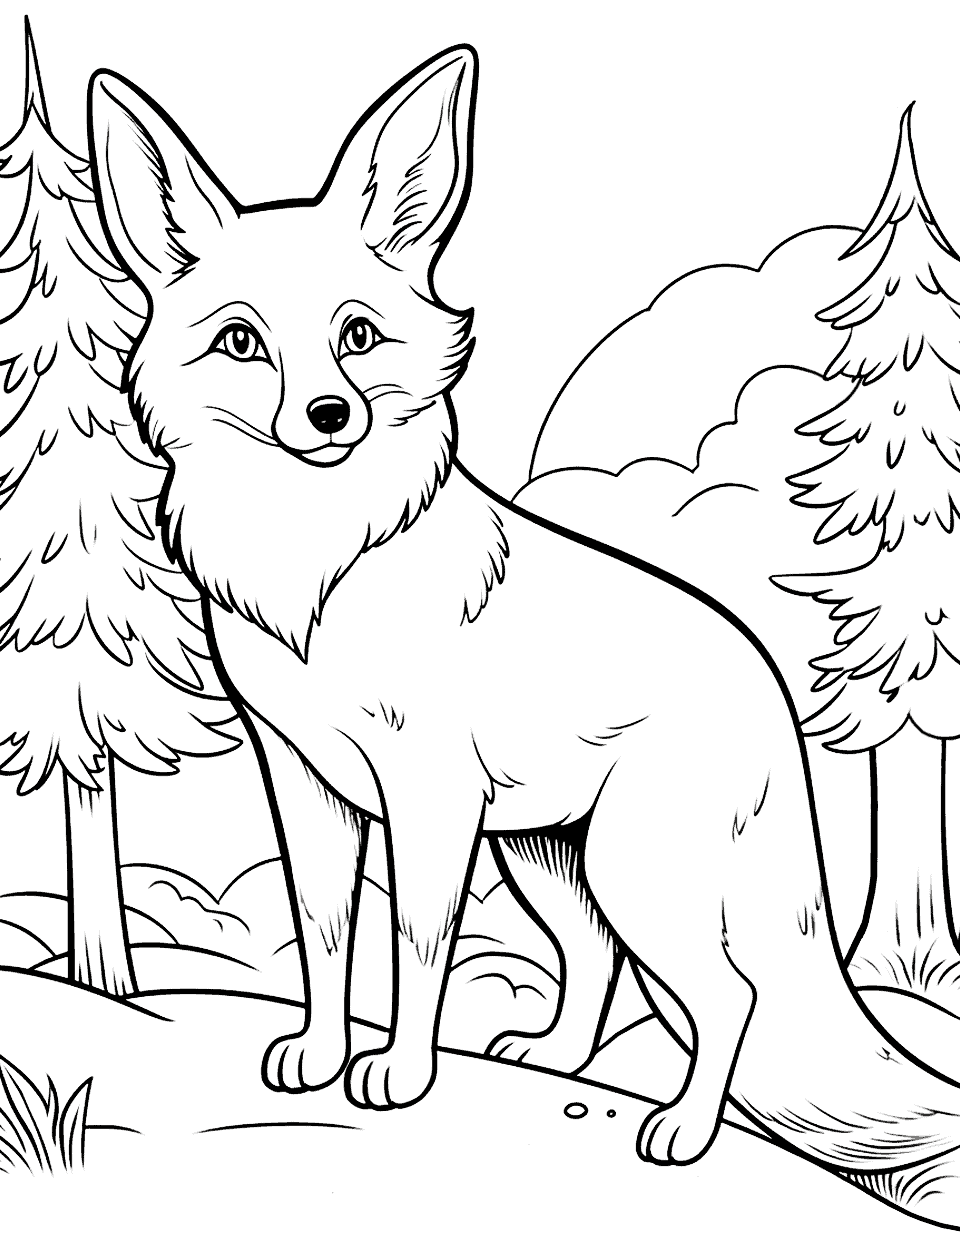 Realistic Forest Fox Coloring Page - A fox depicted in its natural habitat, capturing its keen senses in a detailed forest backdrop.